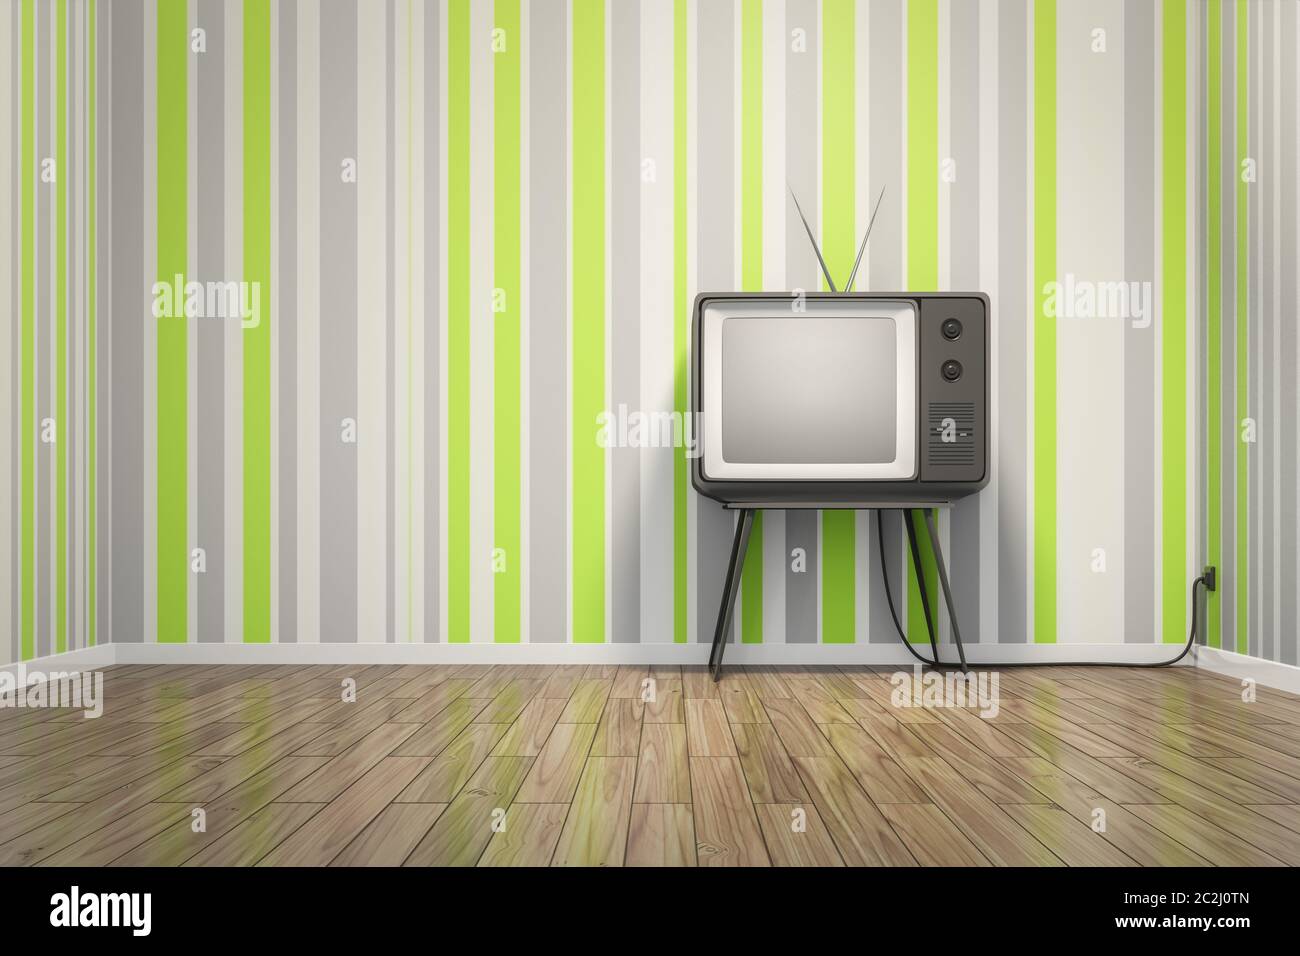 old vintage tube television in seventies style room Stock Photo